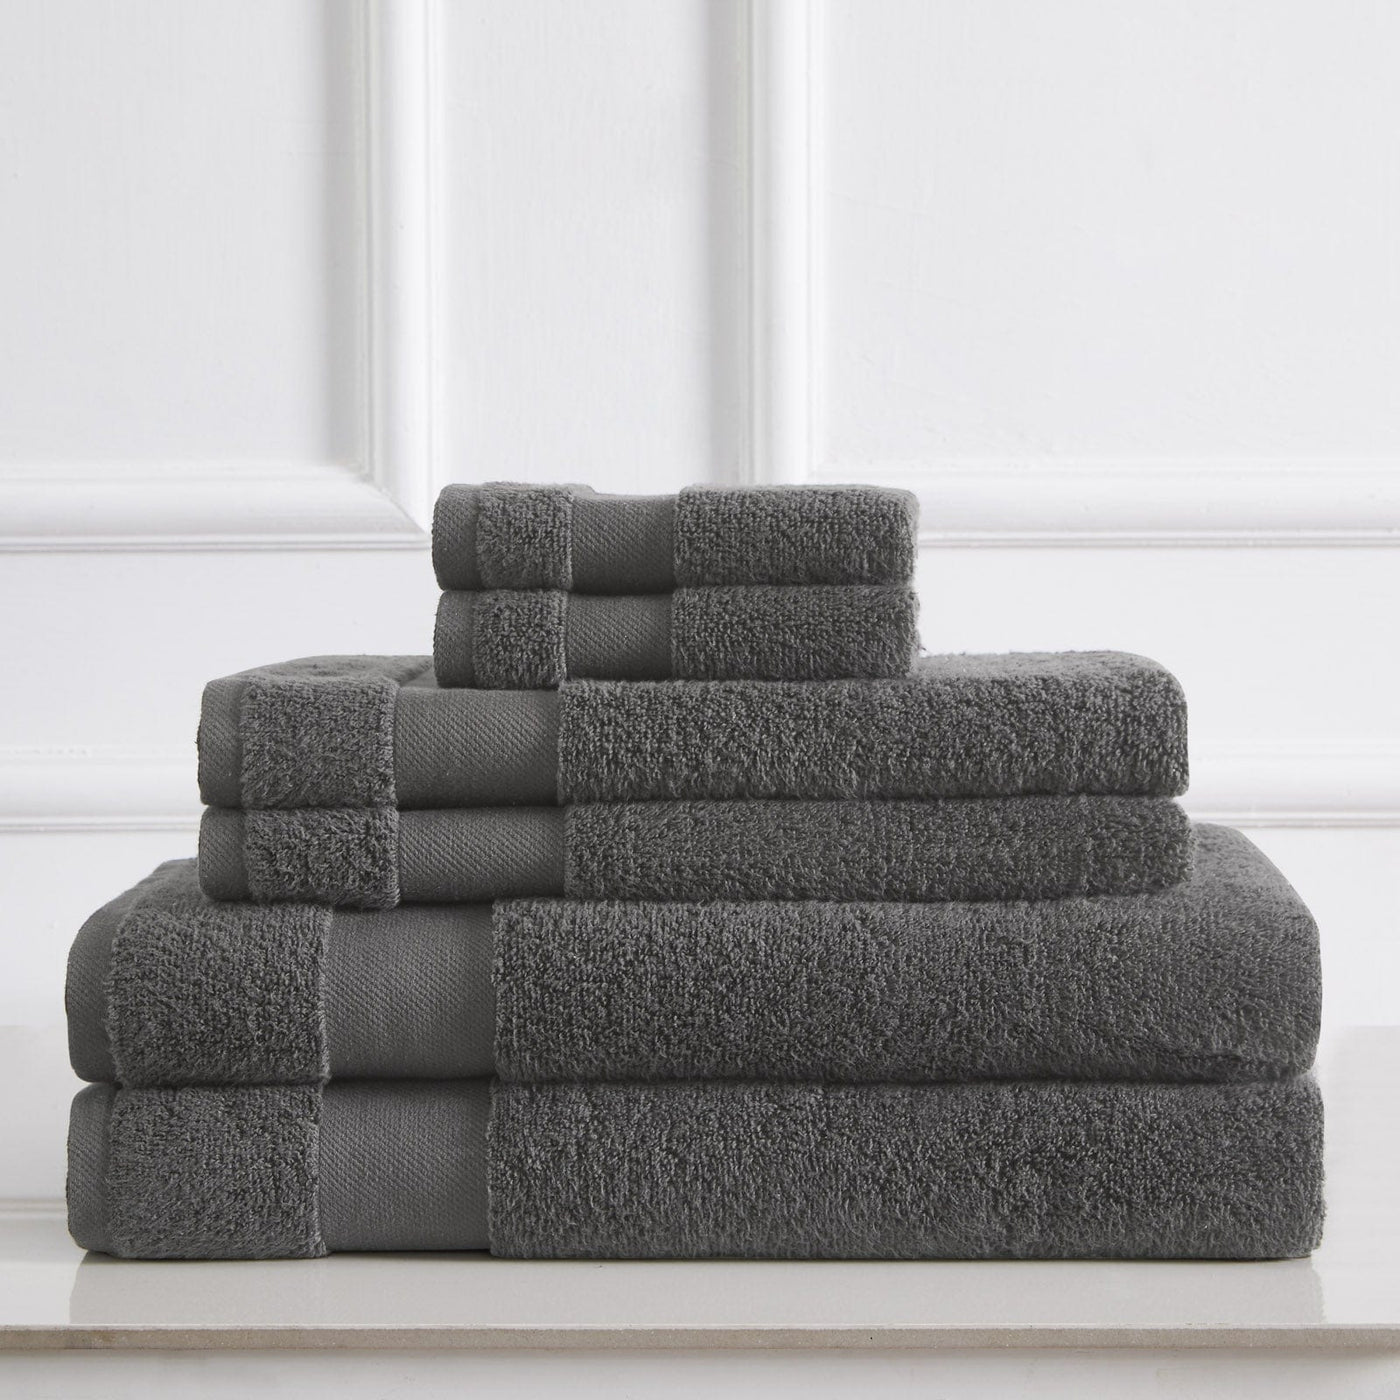 6 Piece of Super-Plush Bath Towel, Hand Towels and Wash Cloth in Charcoal#color_medium-weight-classic-towel-charcoal